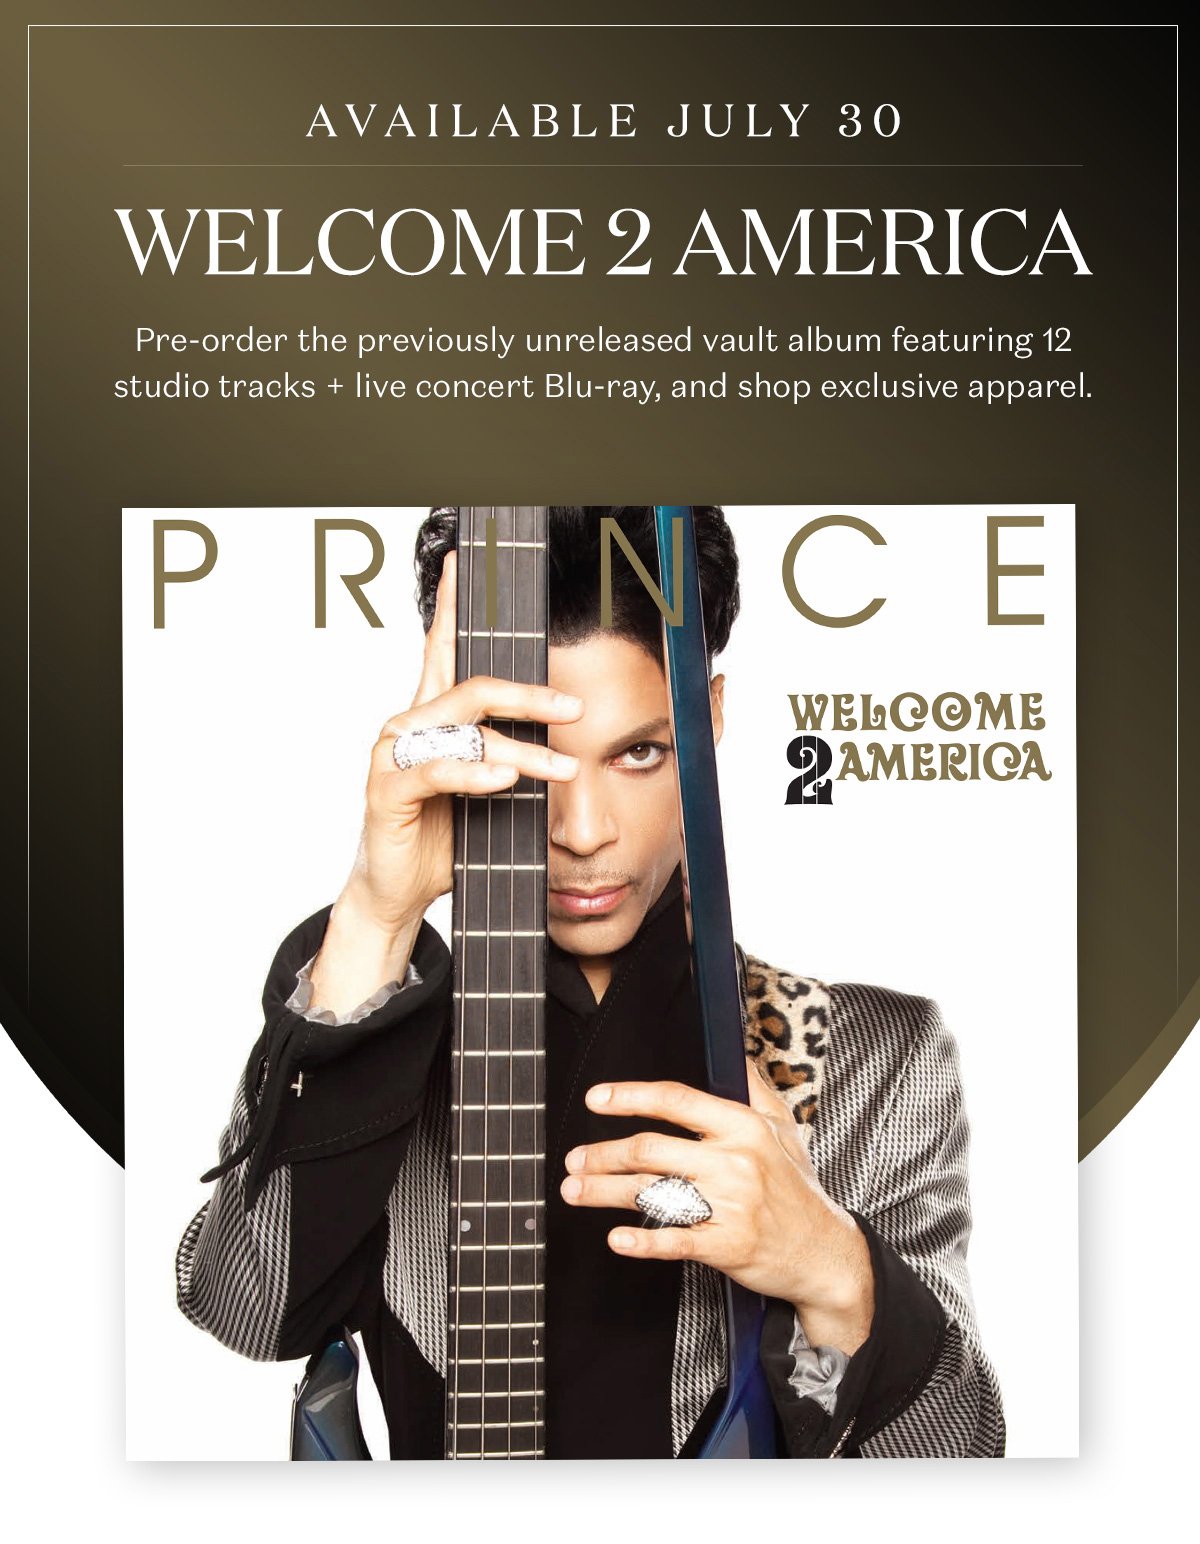 Prince: New Arrivals | Welcome 2 America Merchandise | Milled